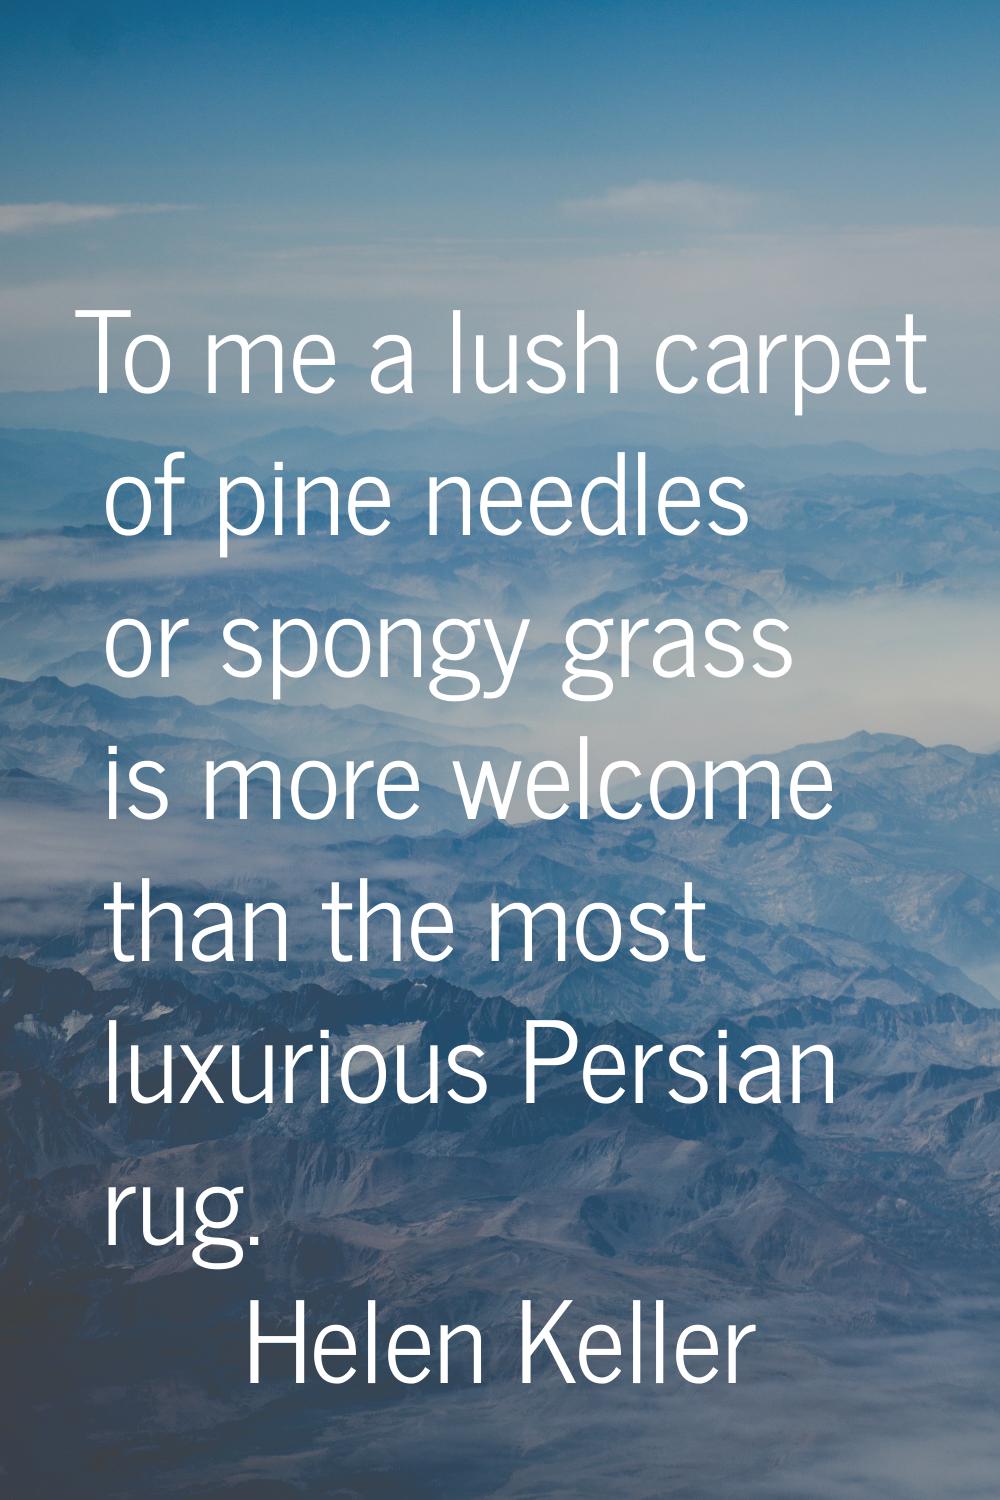 To me a lush carpet of pine needles or spongy grass is more welcome than the most luxurious Persian